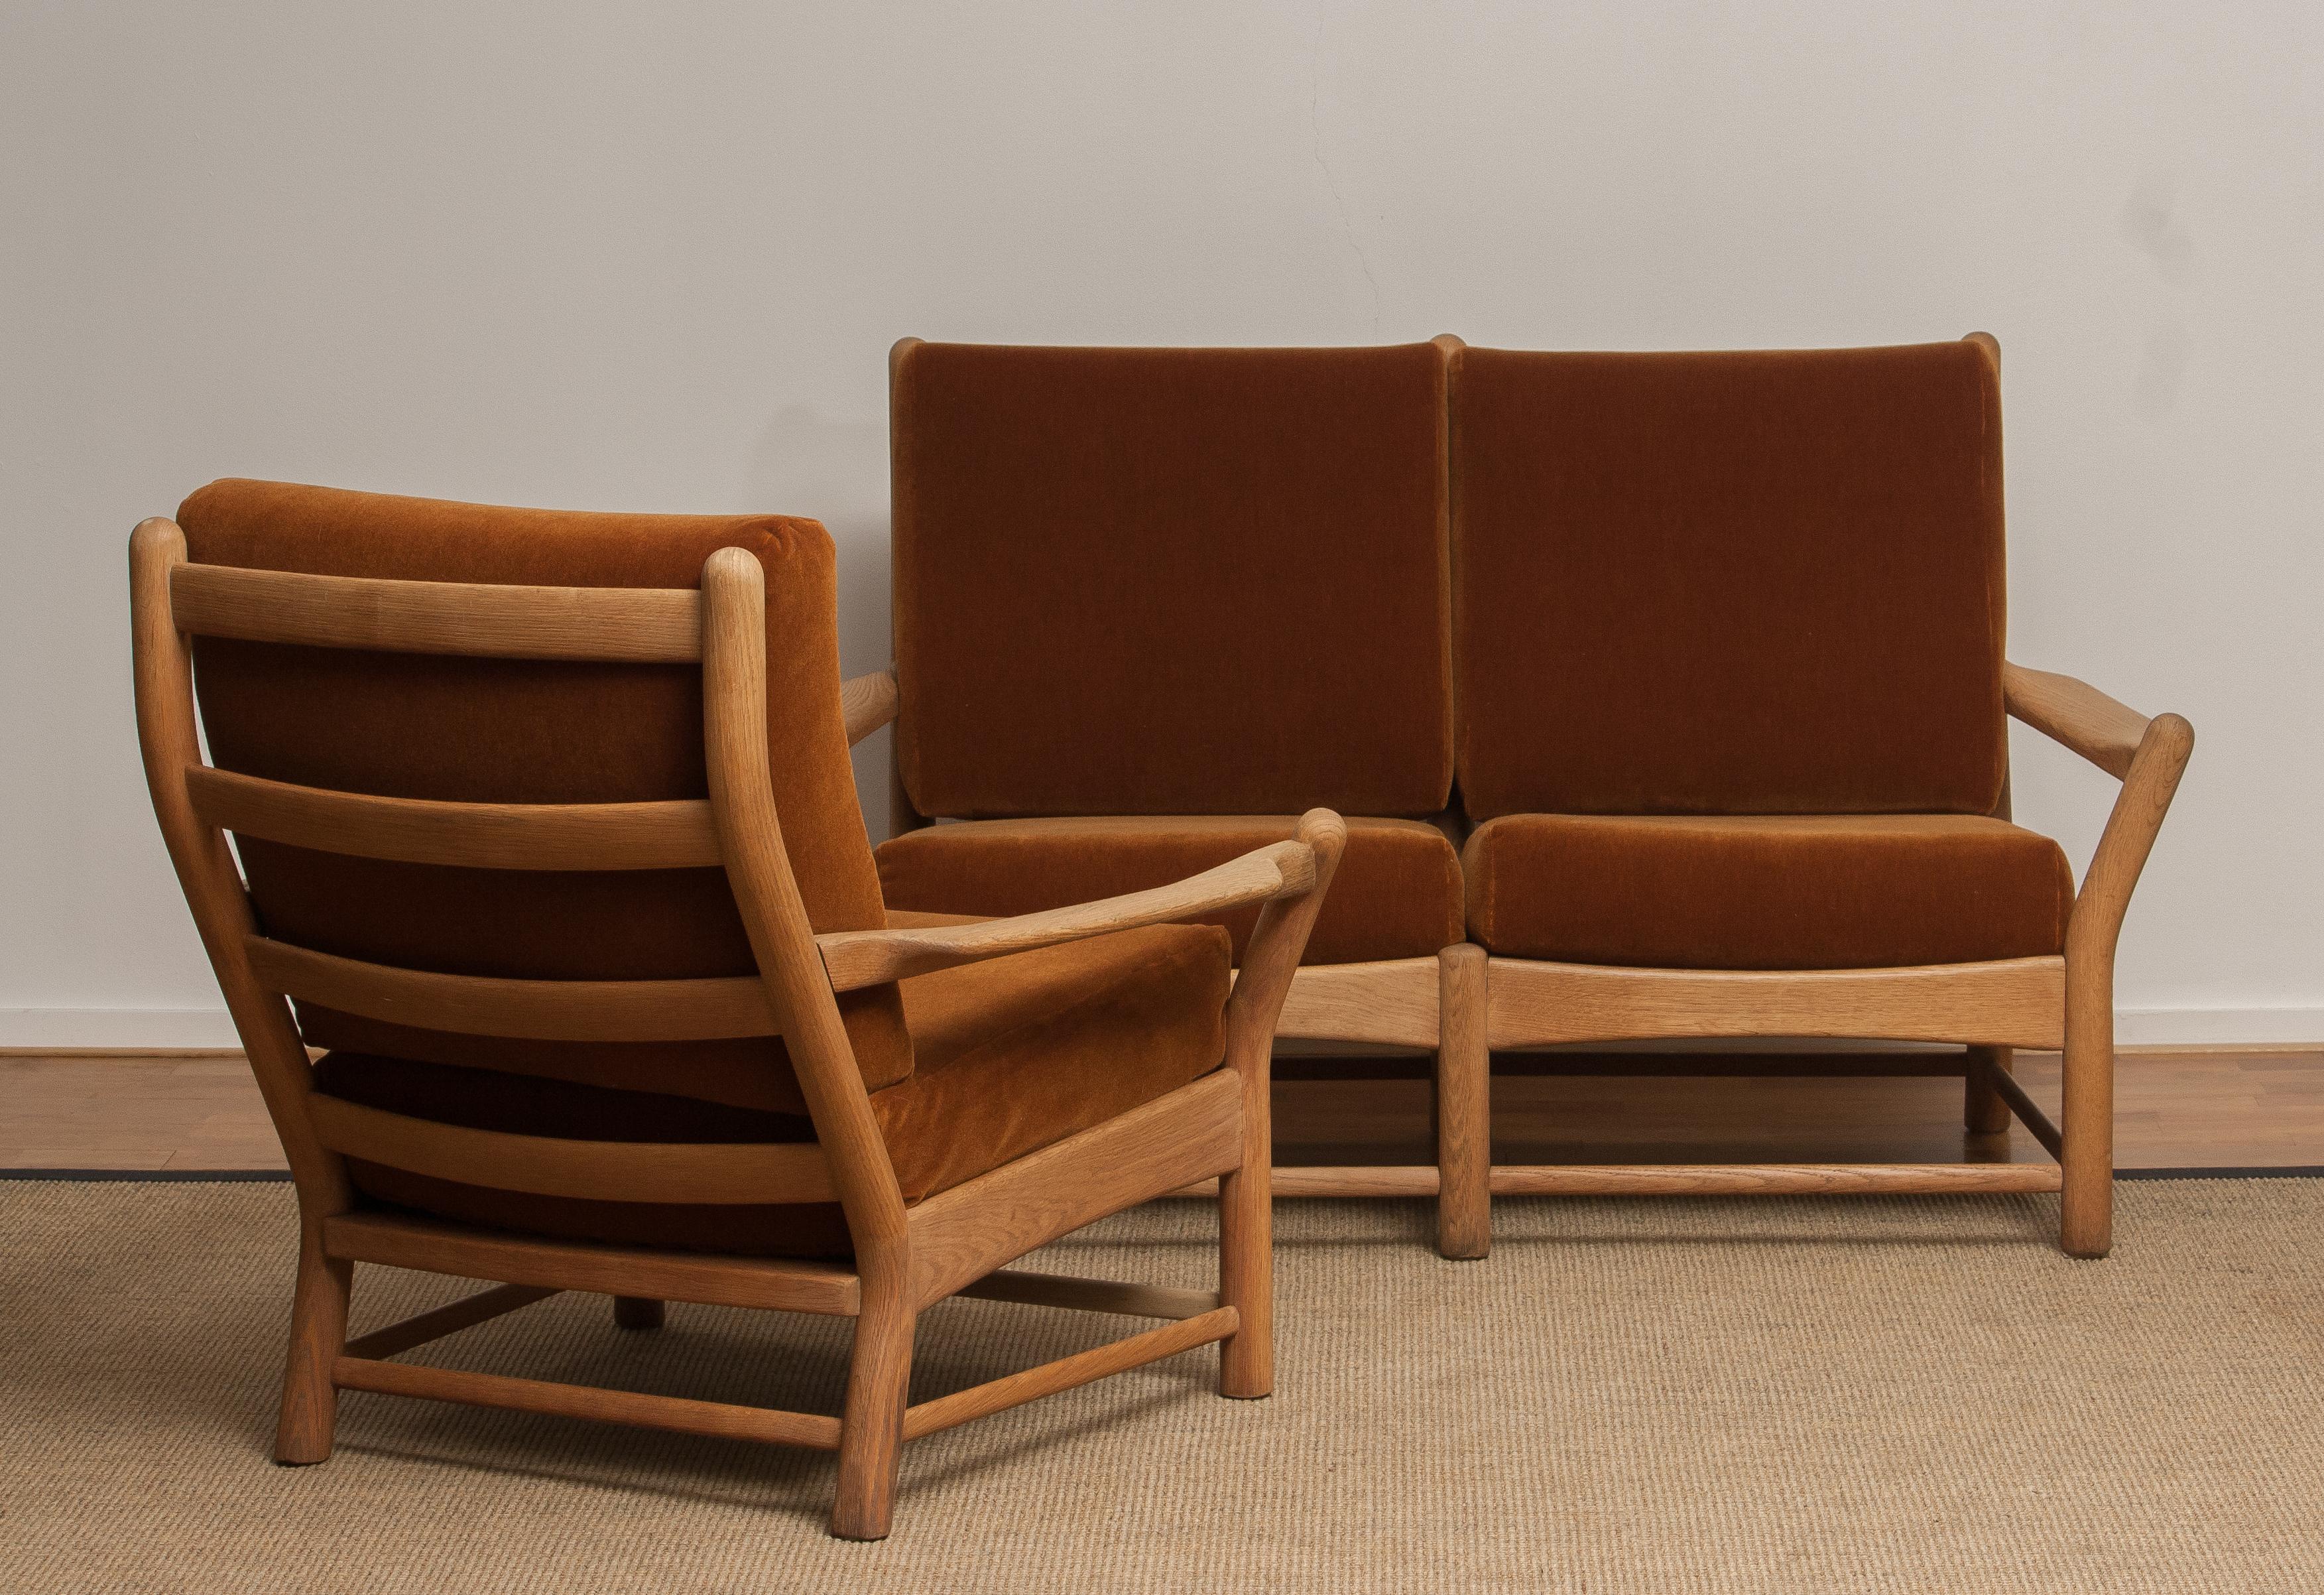 1950s, Oak and Brown Velvet Sofa and Chair Lounge Set from Denmark 2